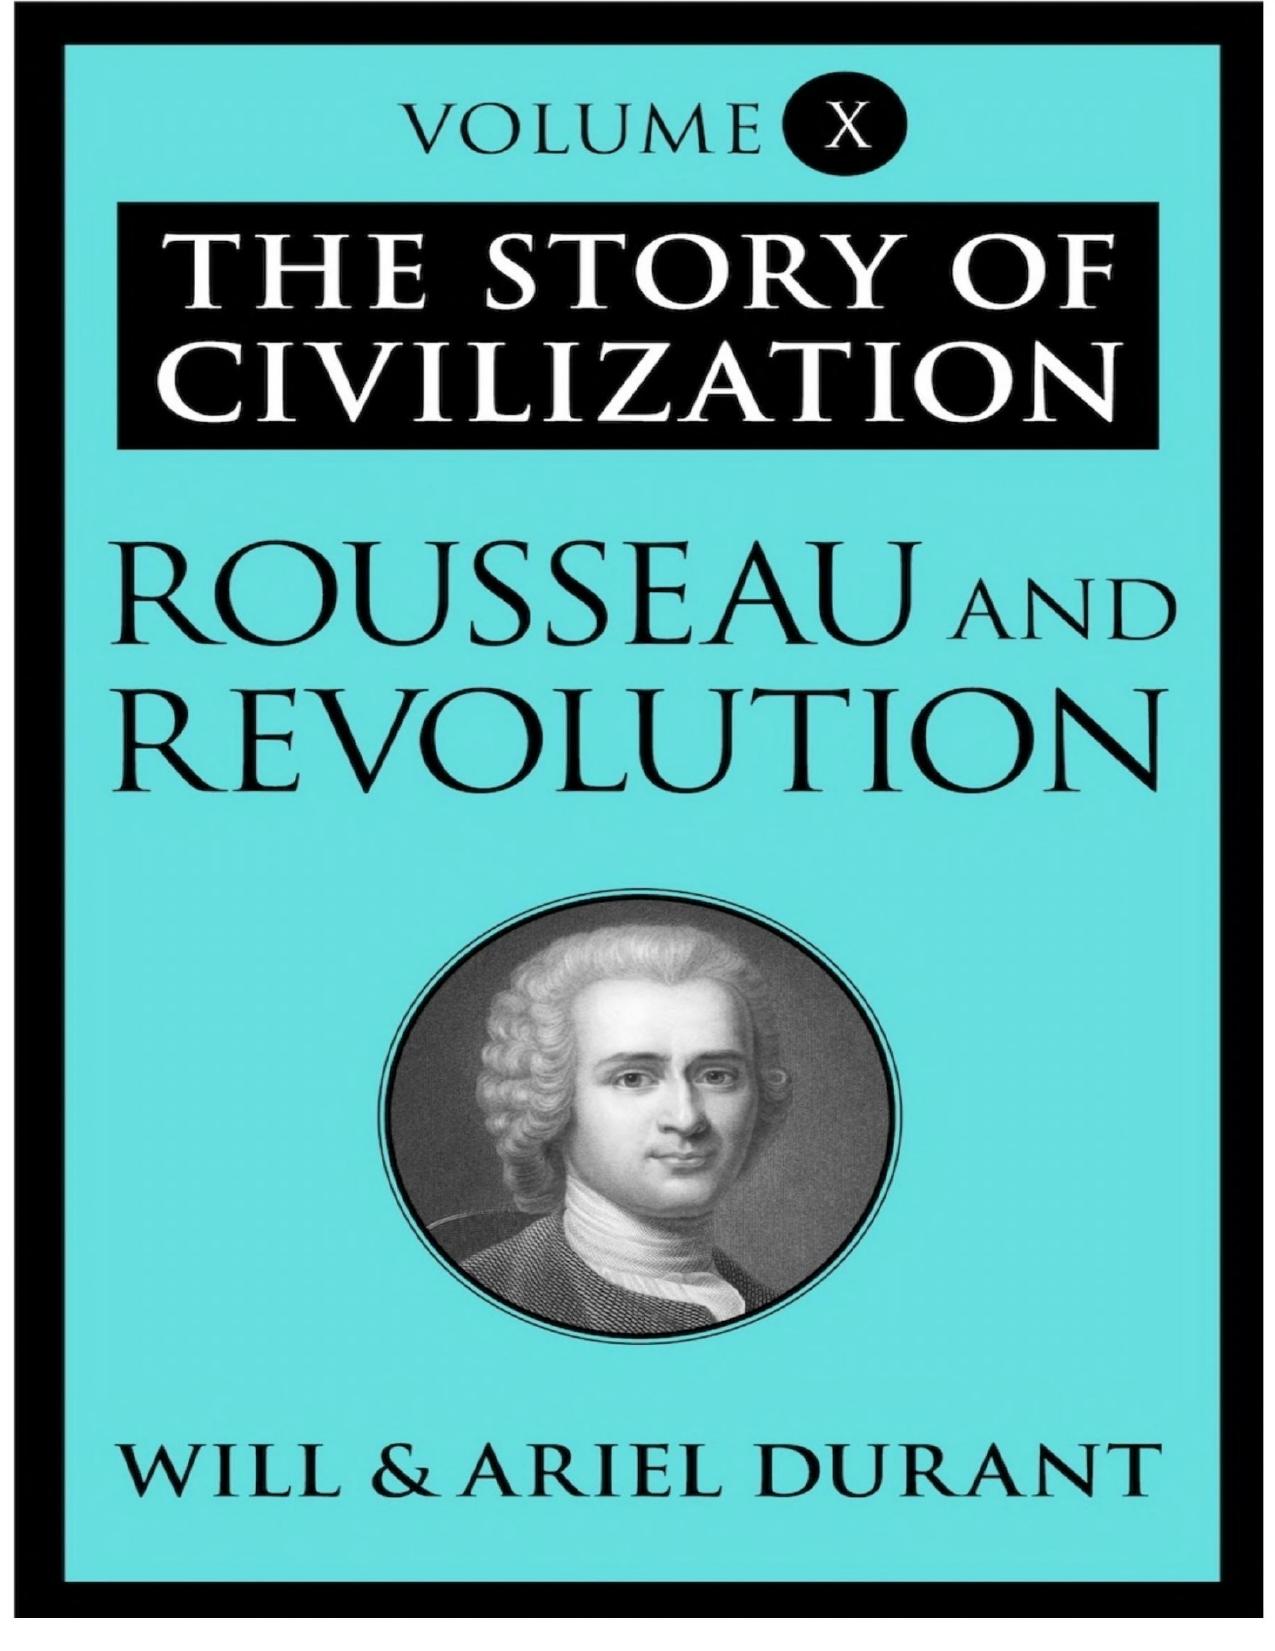 Rousseau and Revolution: The Story of Civilization by Will Durant